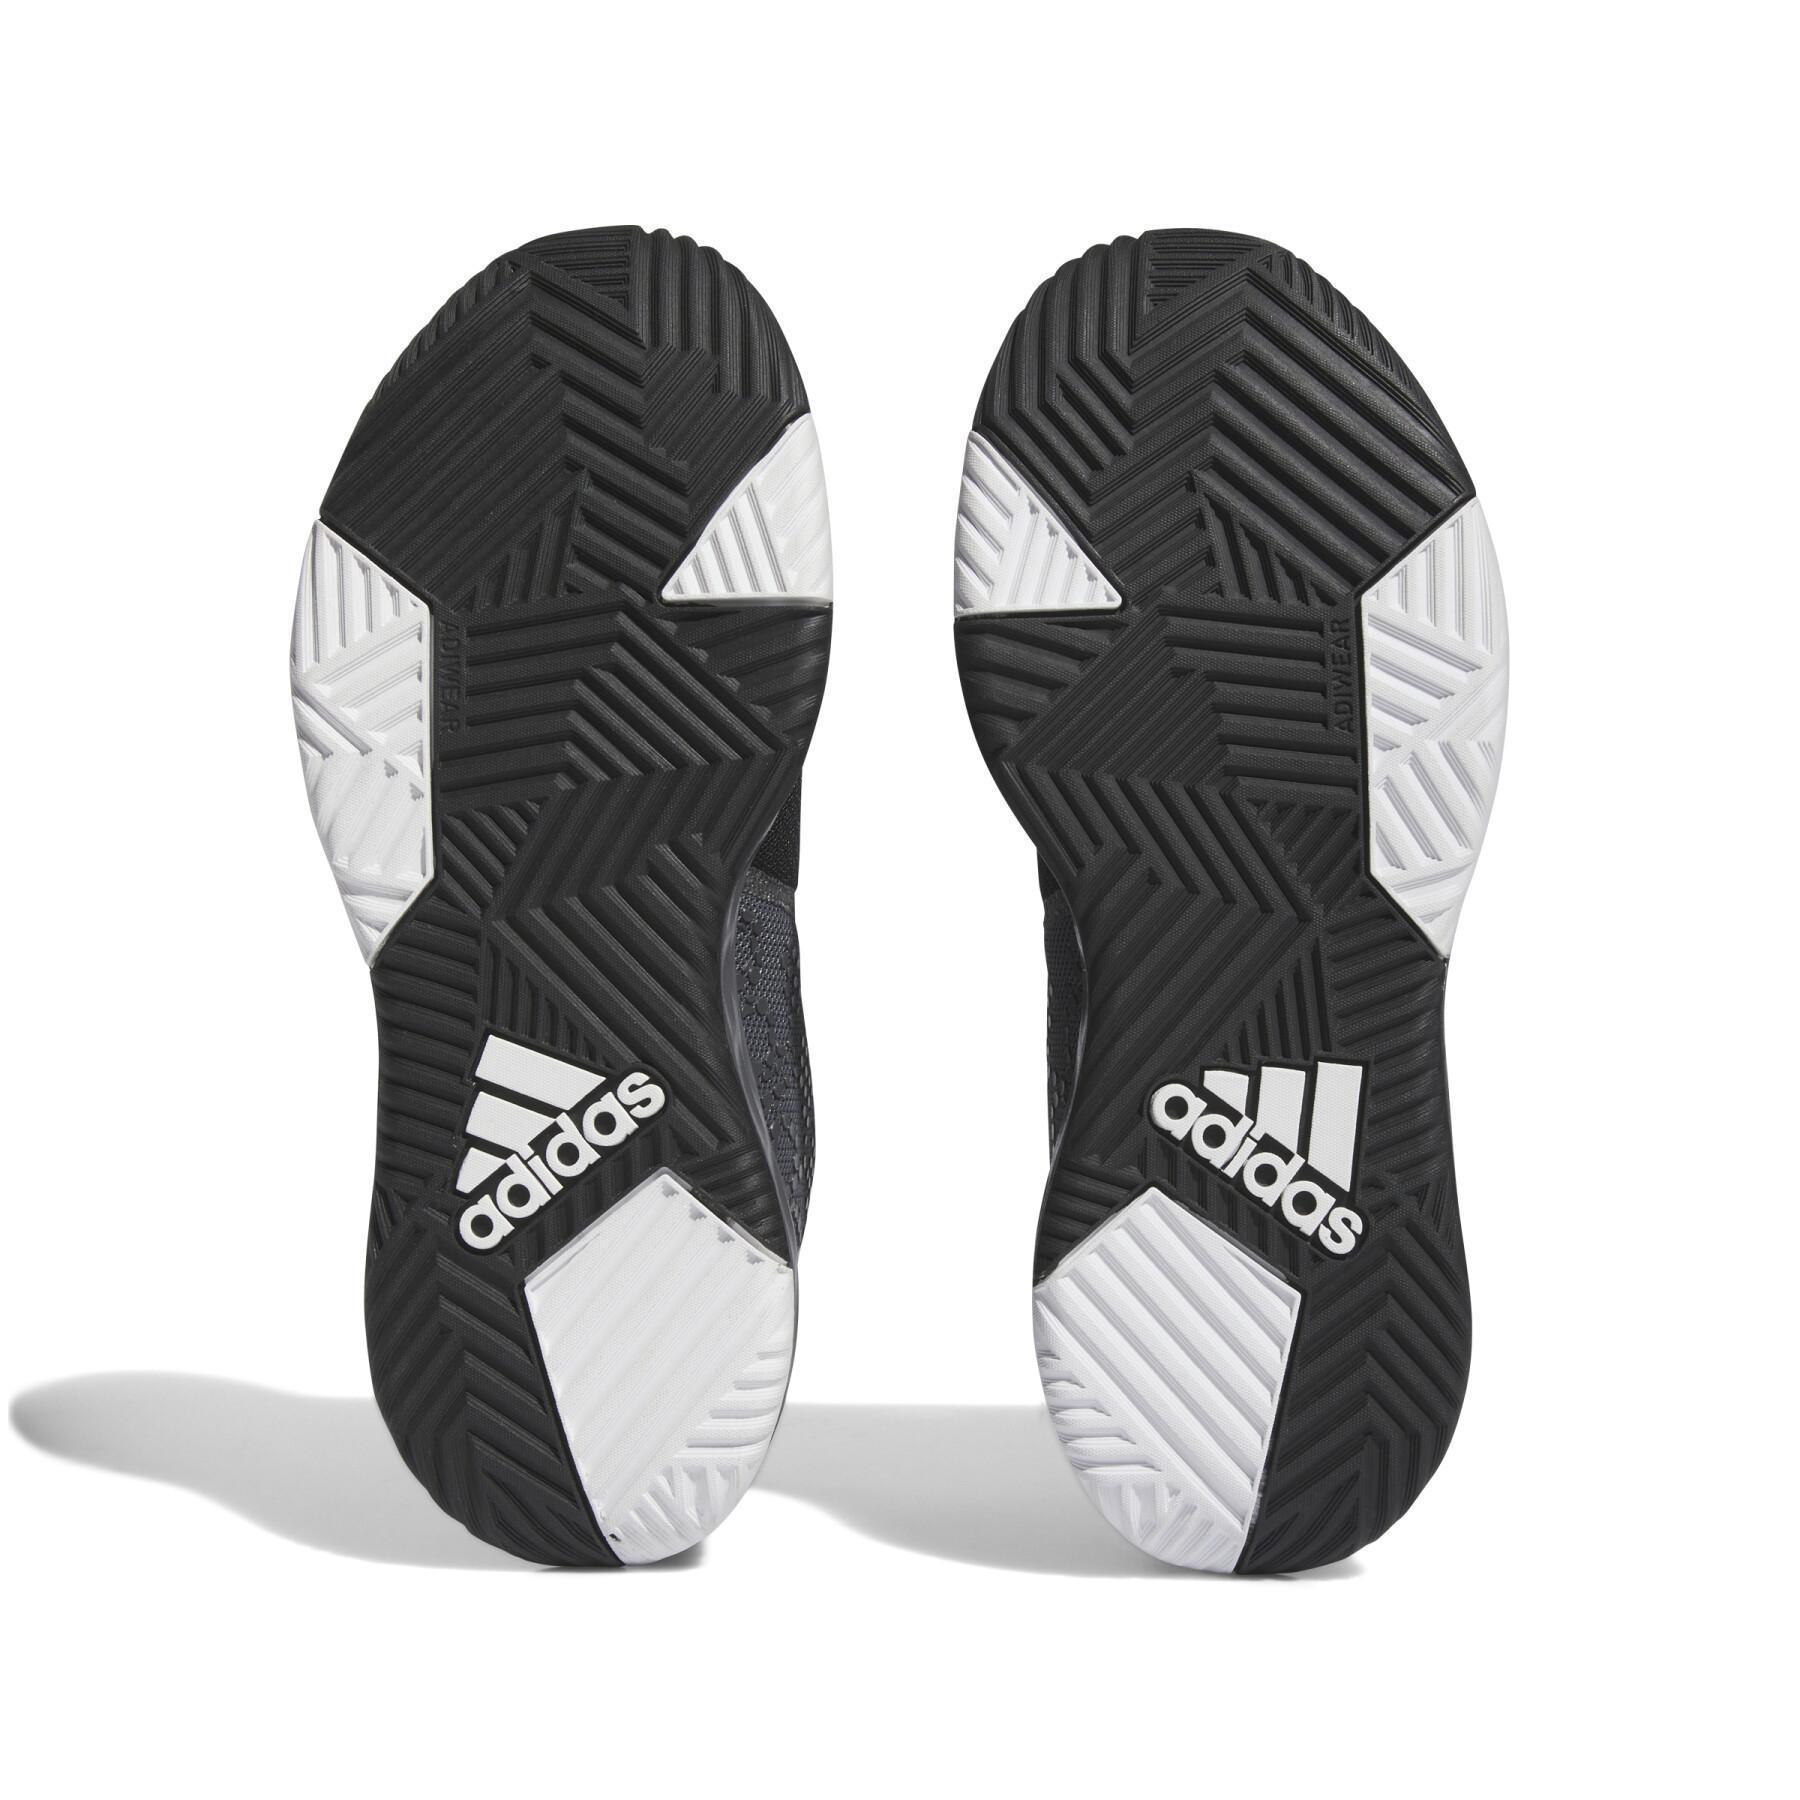 Shoes indoor adidas Ownthegame 2.0